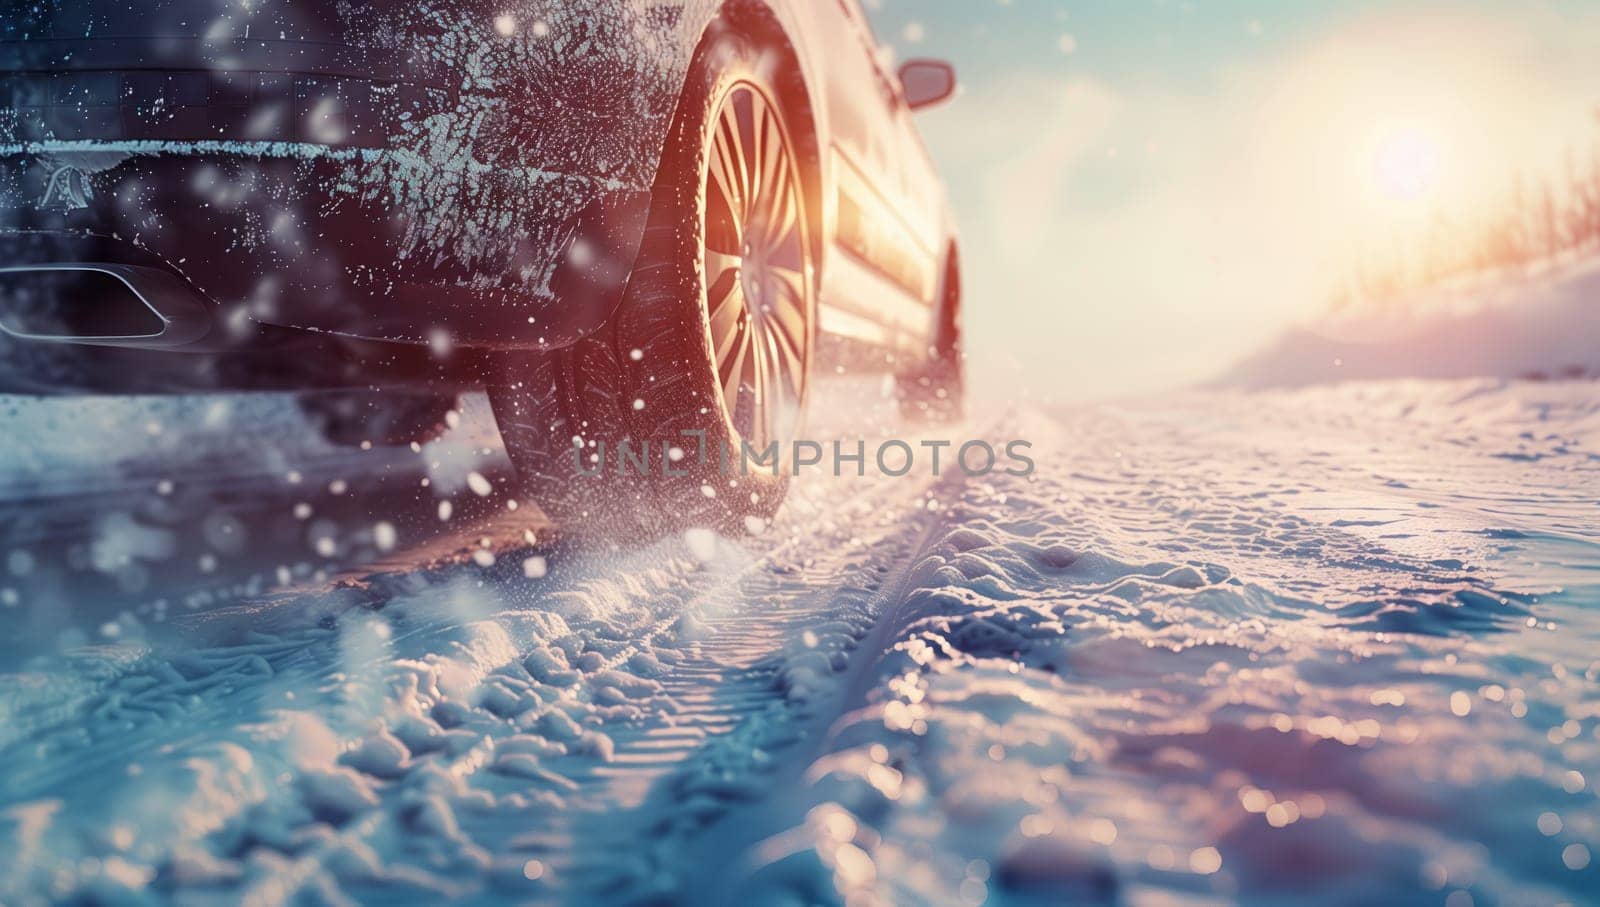 An automotive tire glides through the freezing snow on a snowy road, surrounded by a natural landscape covered in electric blue hues